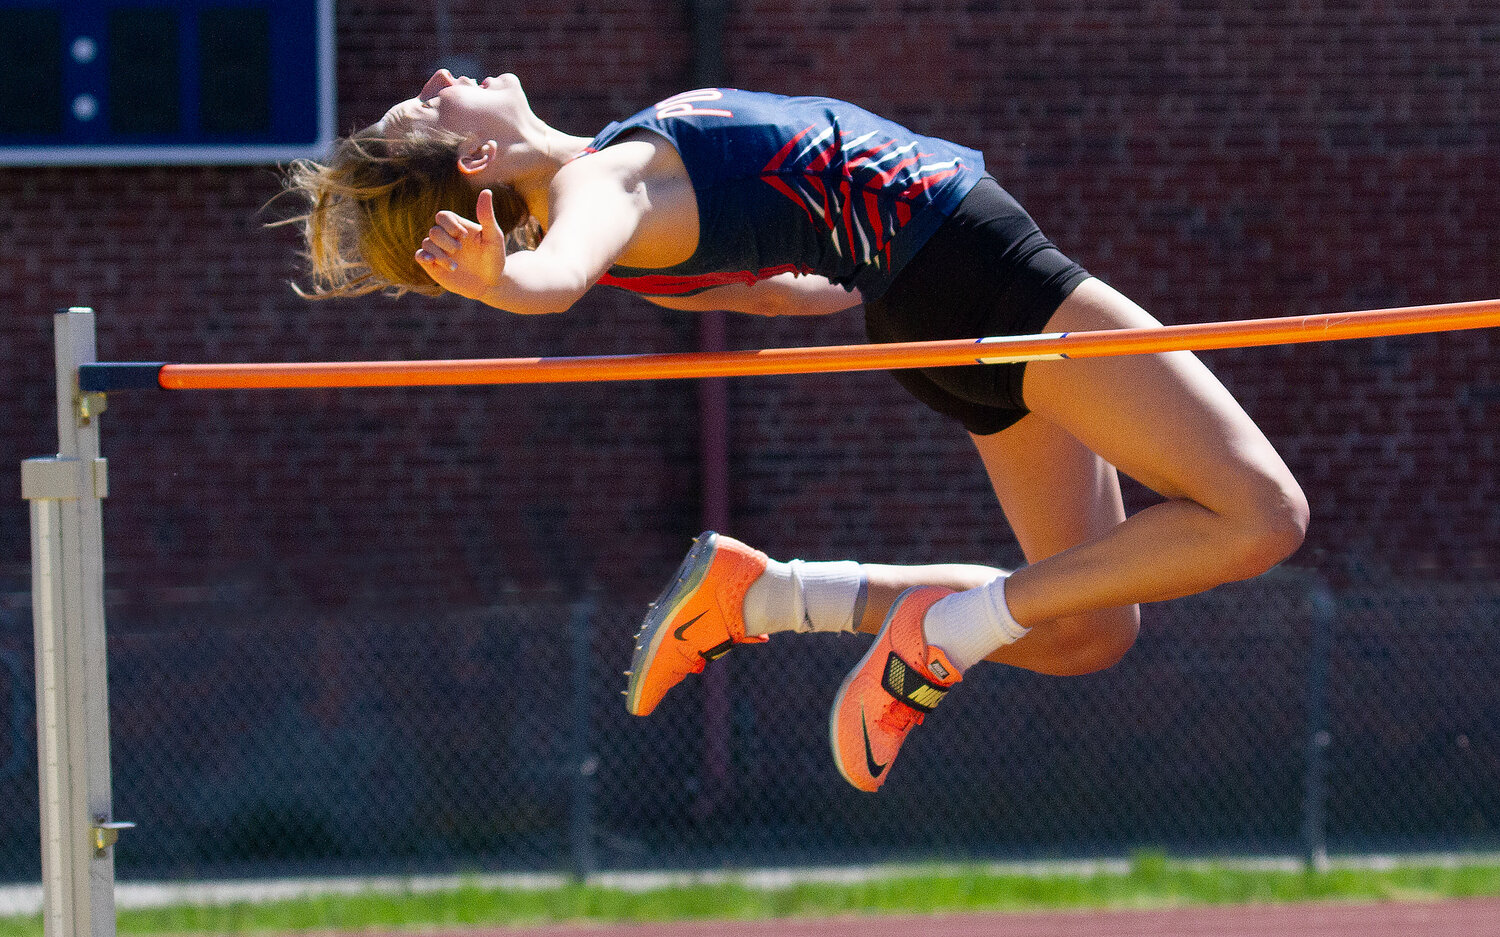 The Patriots’ Morgan Casey soars over the bar en route to winning the girl’s high jump with a leap of 5 feet, 3 inches.